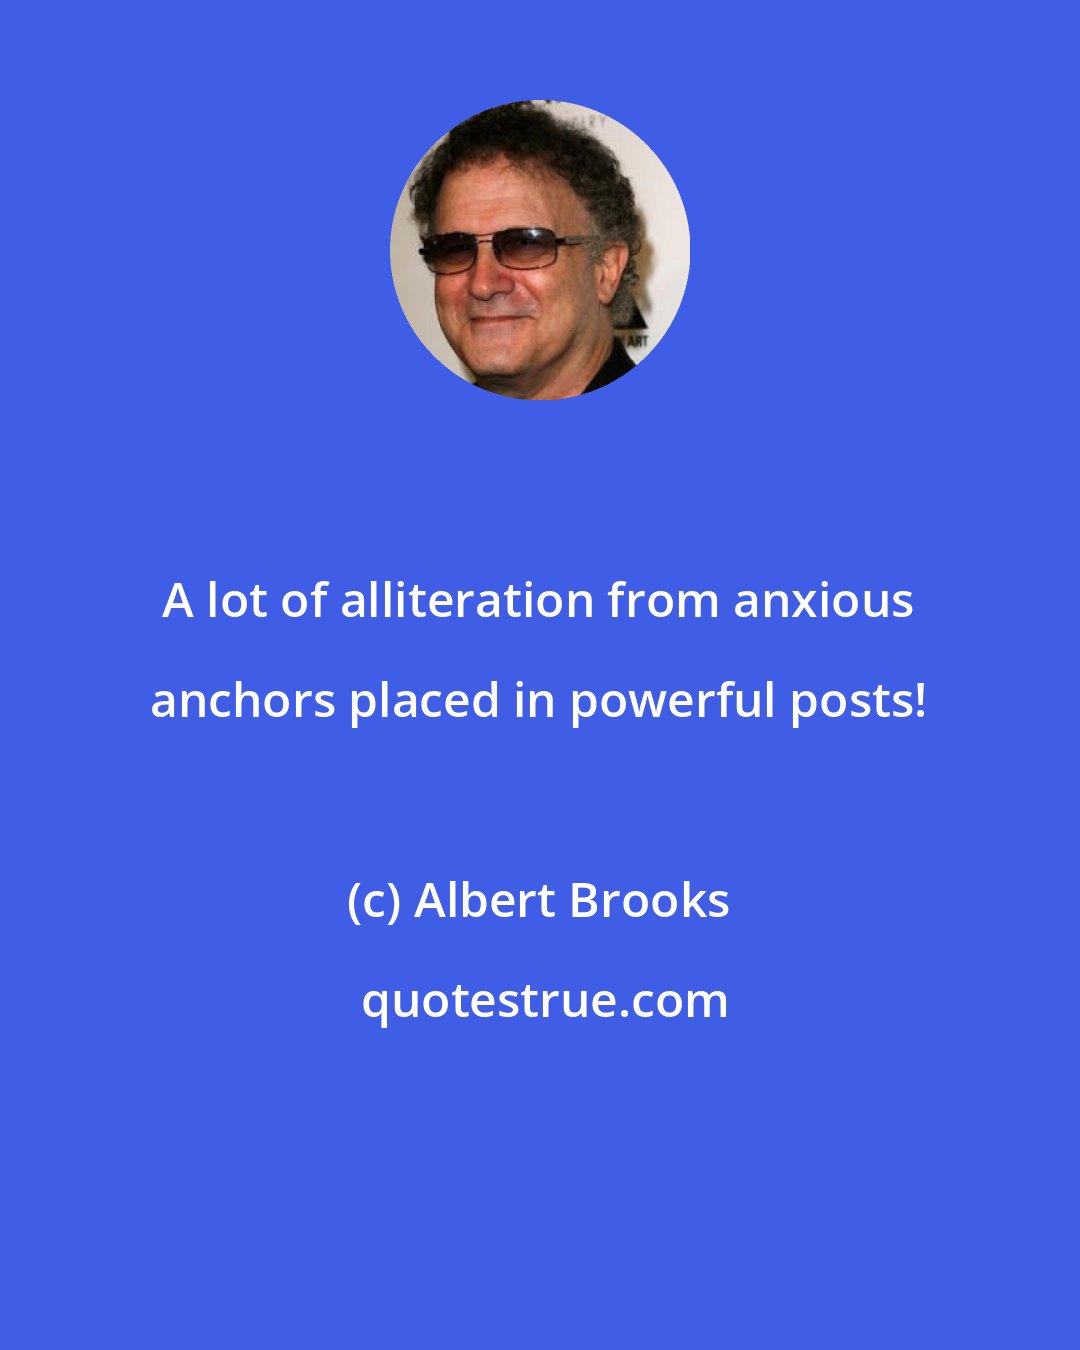 Albert Brooks: A lot of alliteration from anxious anchors placed in powerful posts!